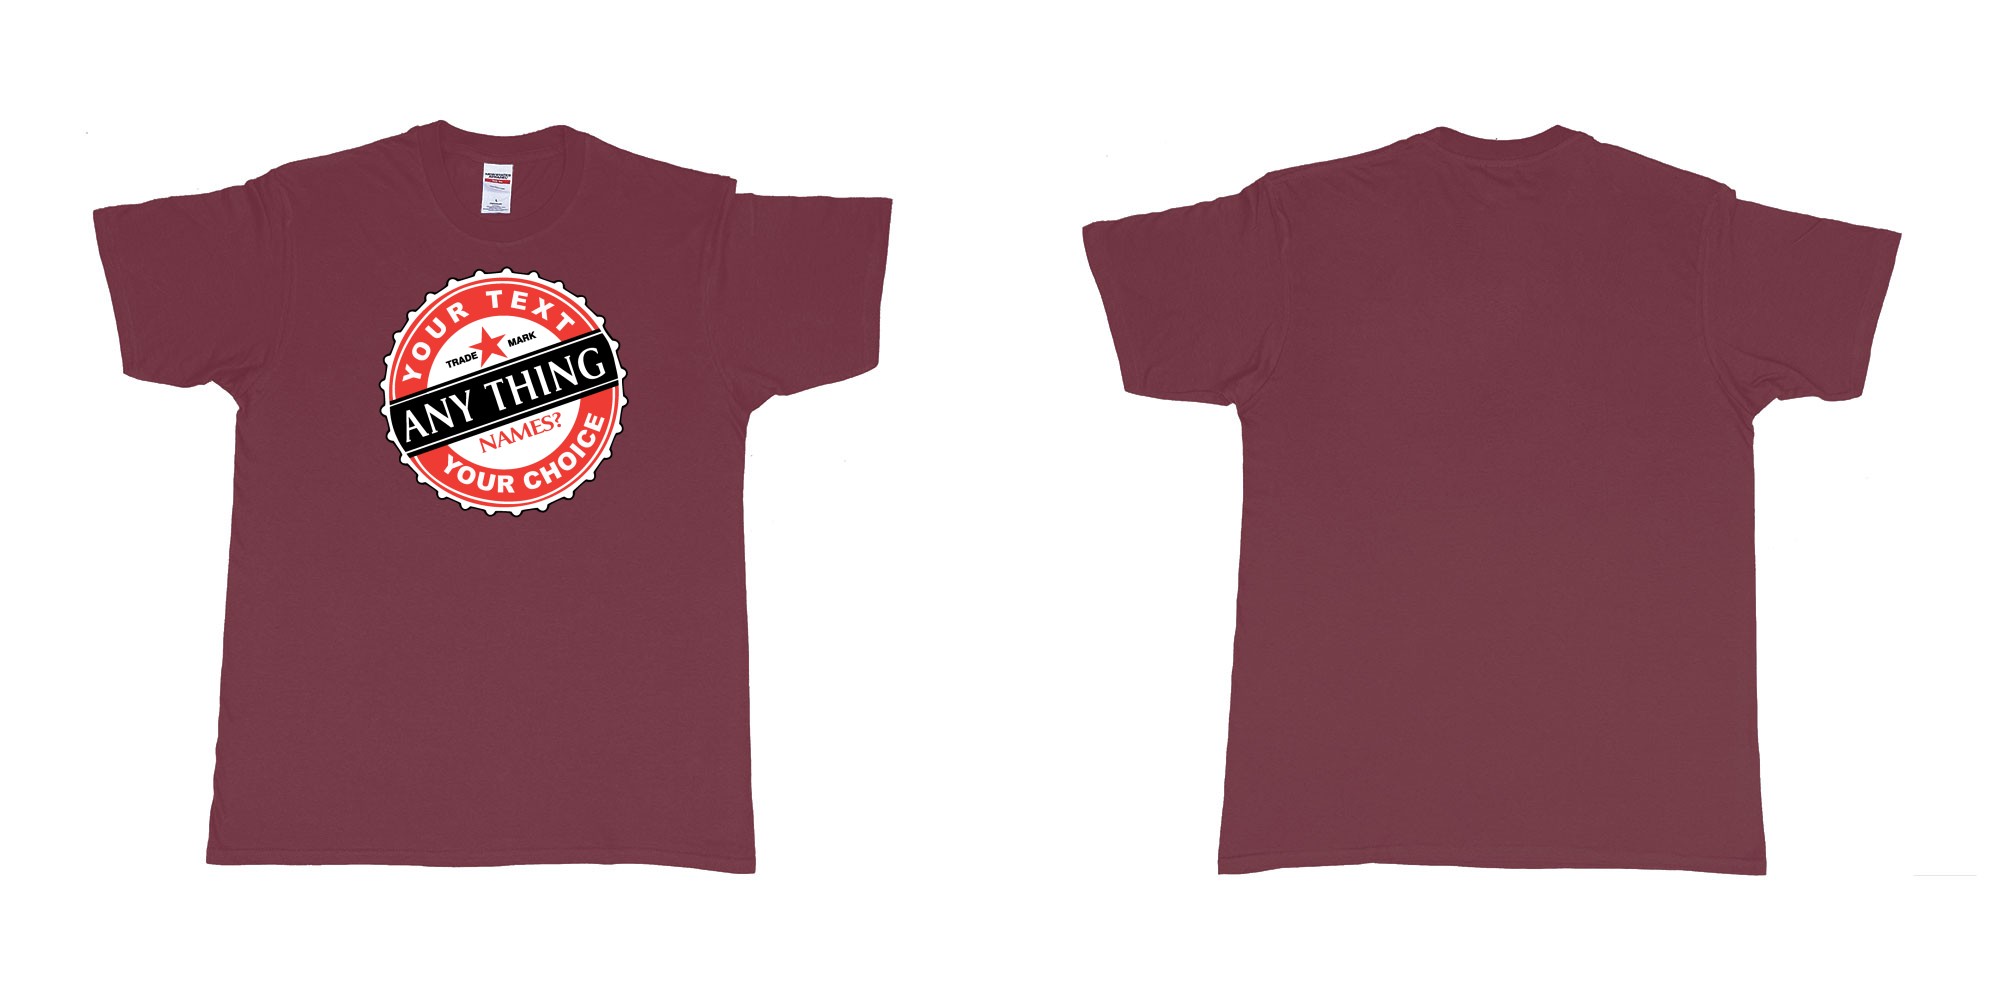 Custom tshirt design bintang in fabric color marron choice your own text made in Bali by The Pirate Way